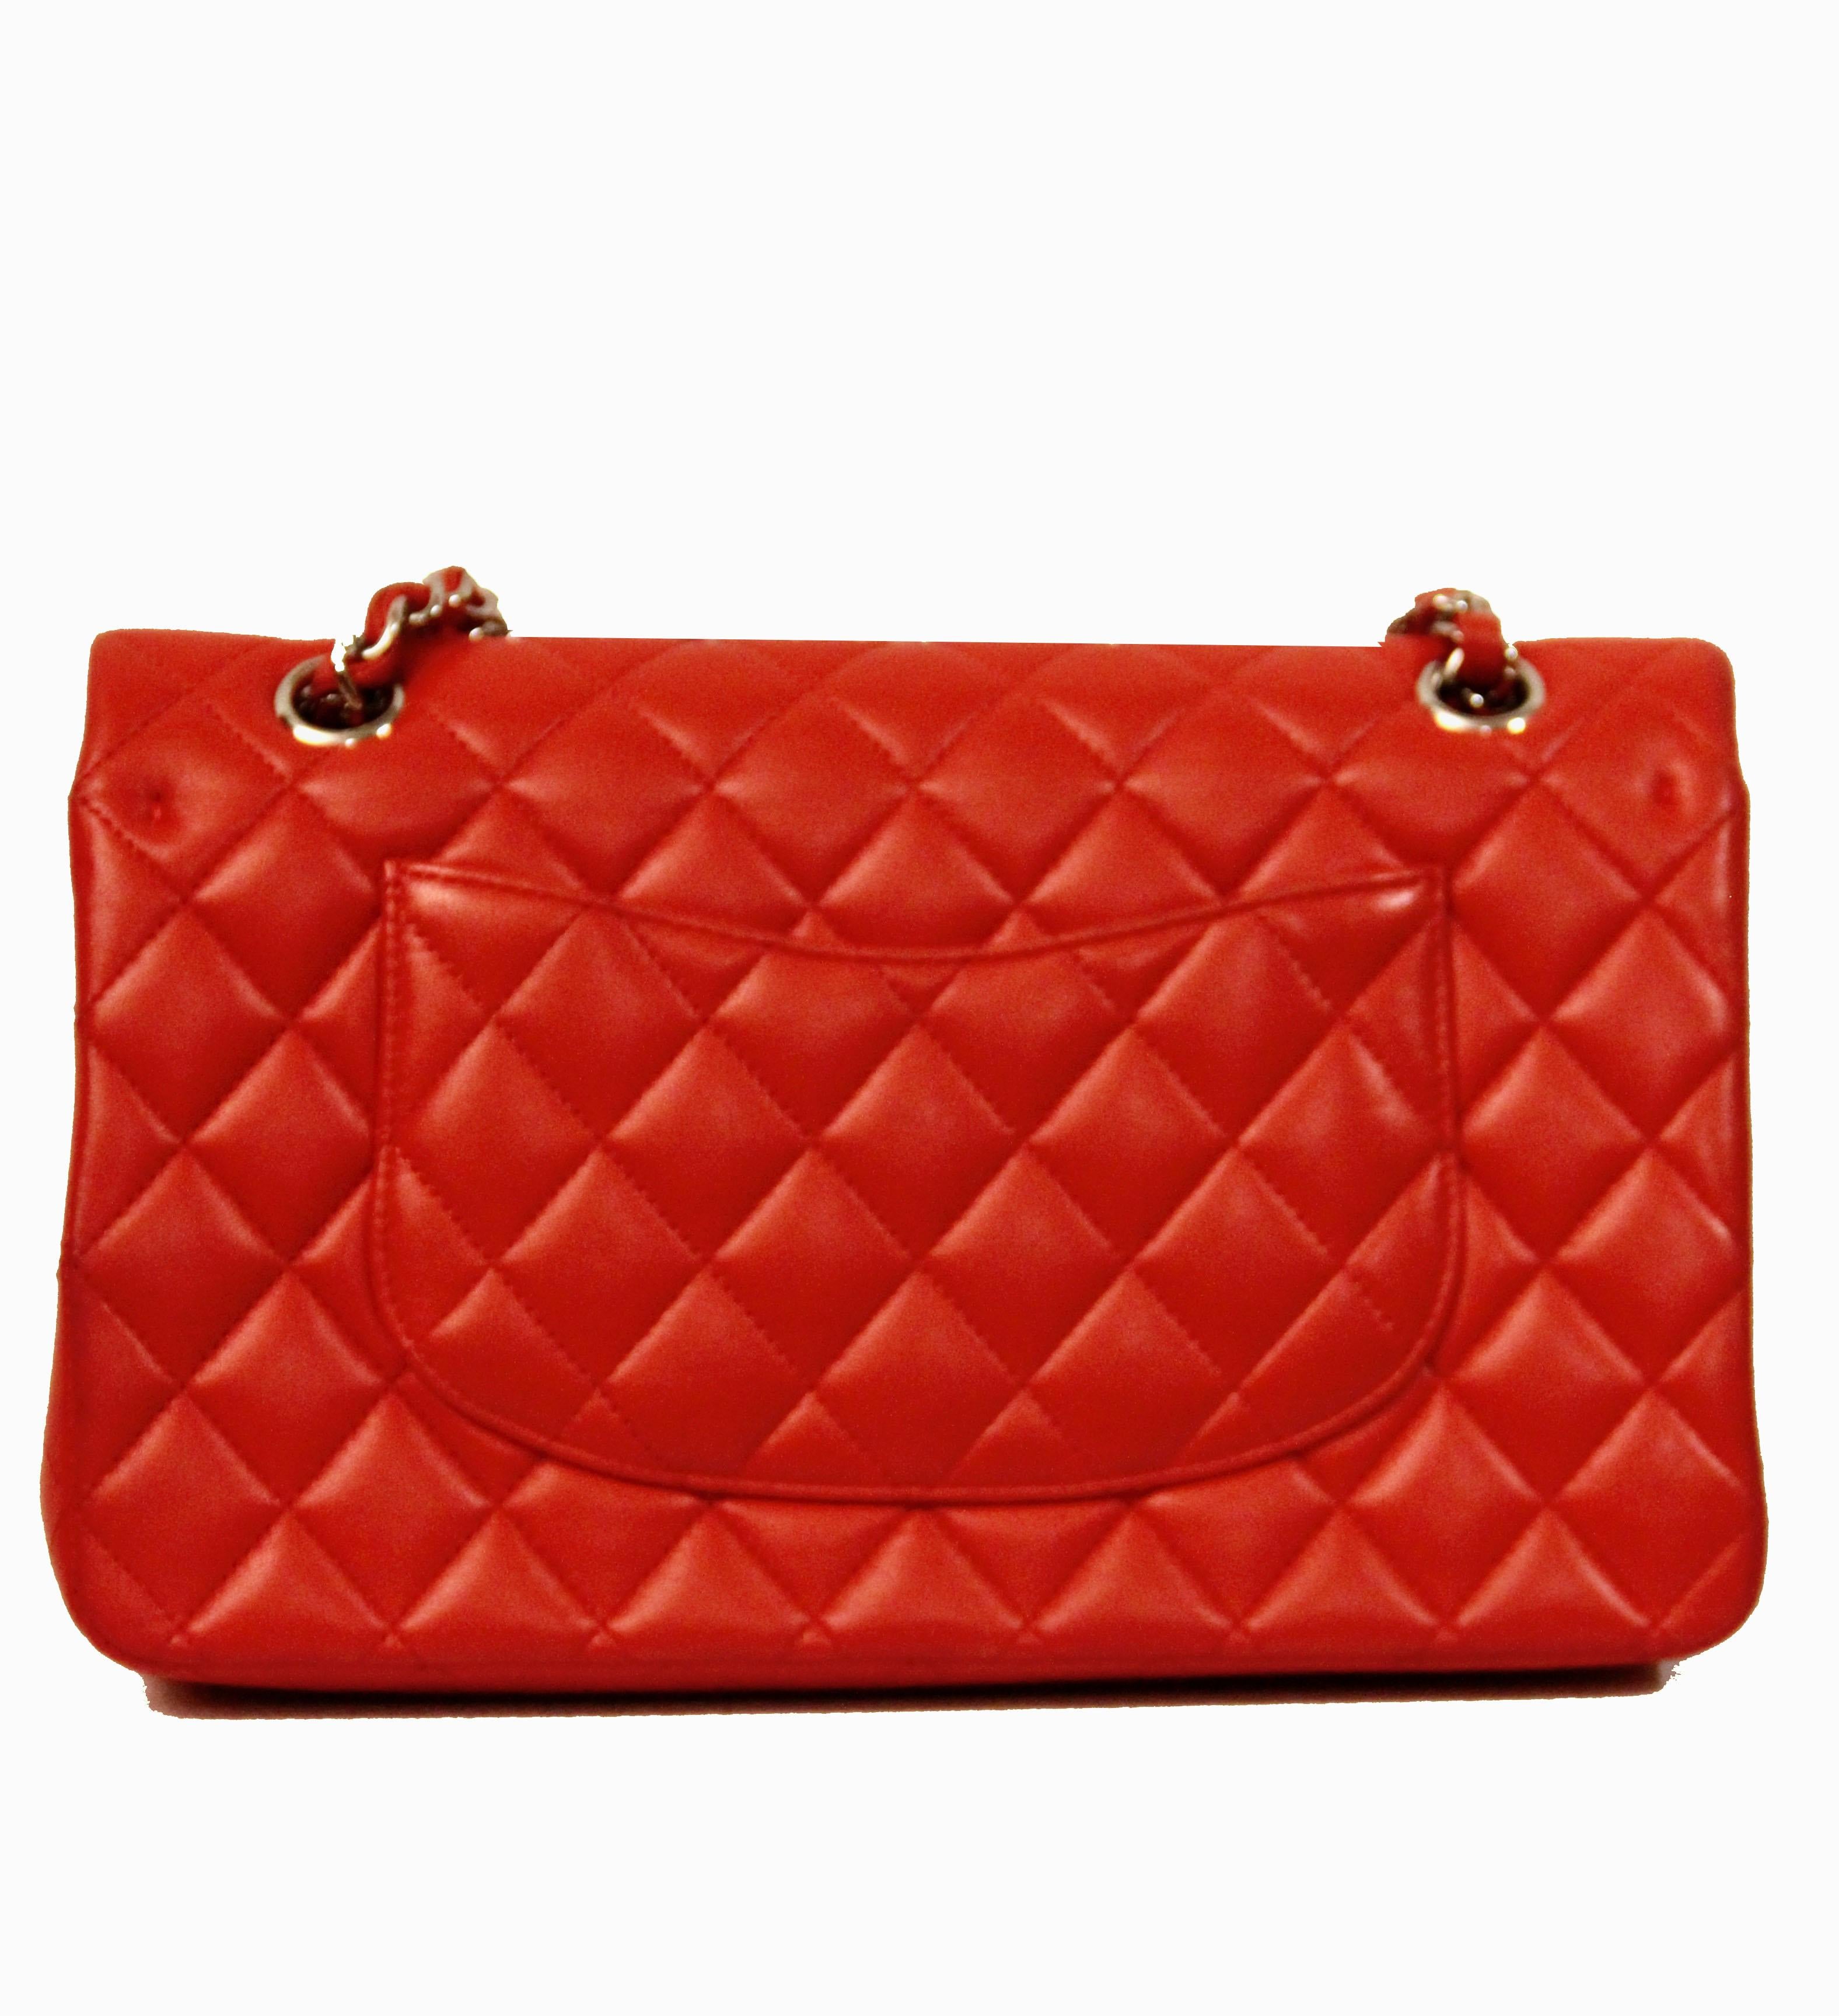 This pre-owned Classic Handbag from Chanel is made of a Limited Edition color - red/orange - quilted lambskin and silver-tone metal finish.

Year: 2014
Leather: Lambskin
Color: Red/Orange
Hardware: Silver-Tone Metal finish
Dimensions: 25.5 x 16.5 x